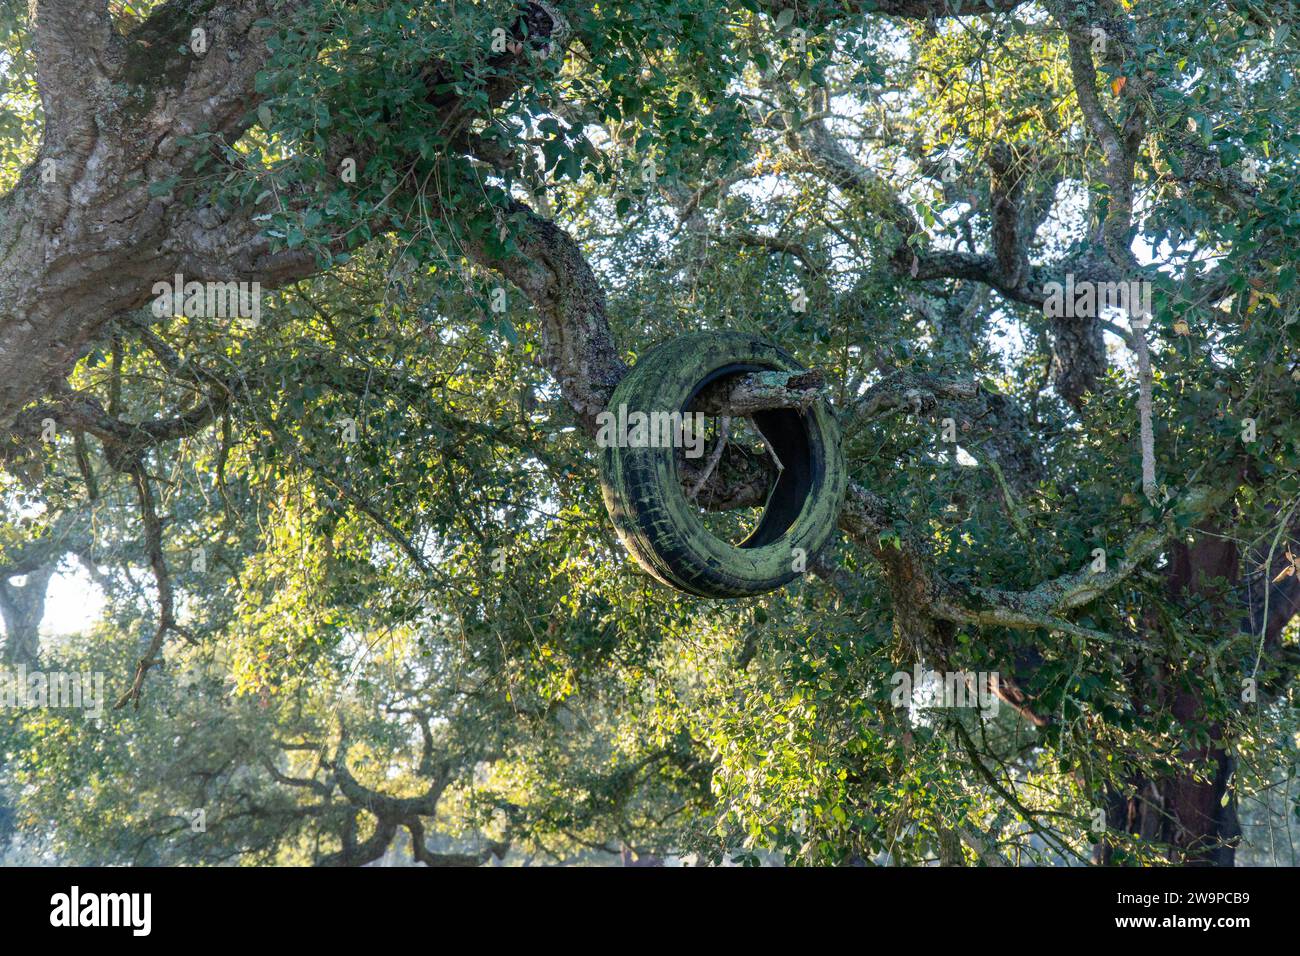 Human stupidity polluting nature: tire dumped on a tree branch, symbolizing environmental negligence. Stock Photo